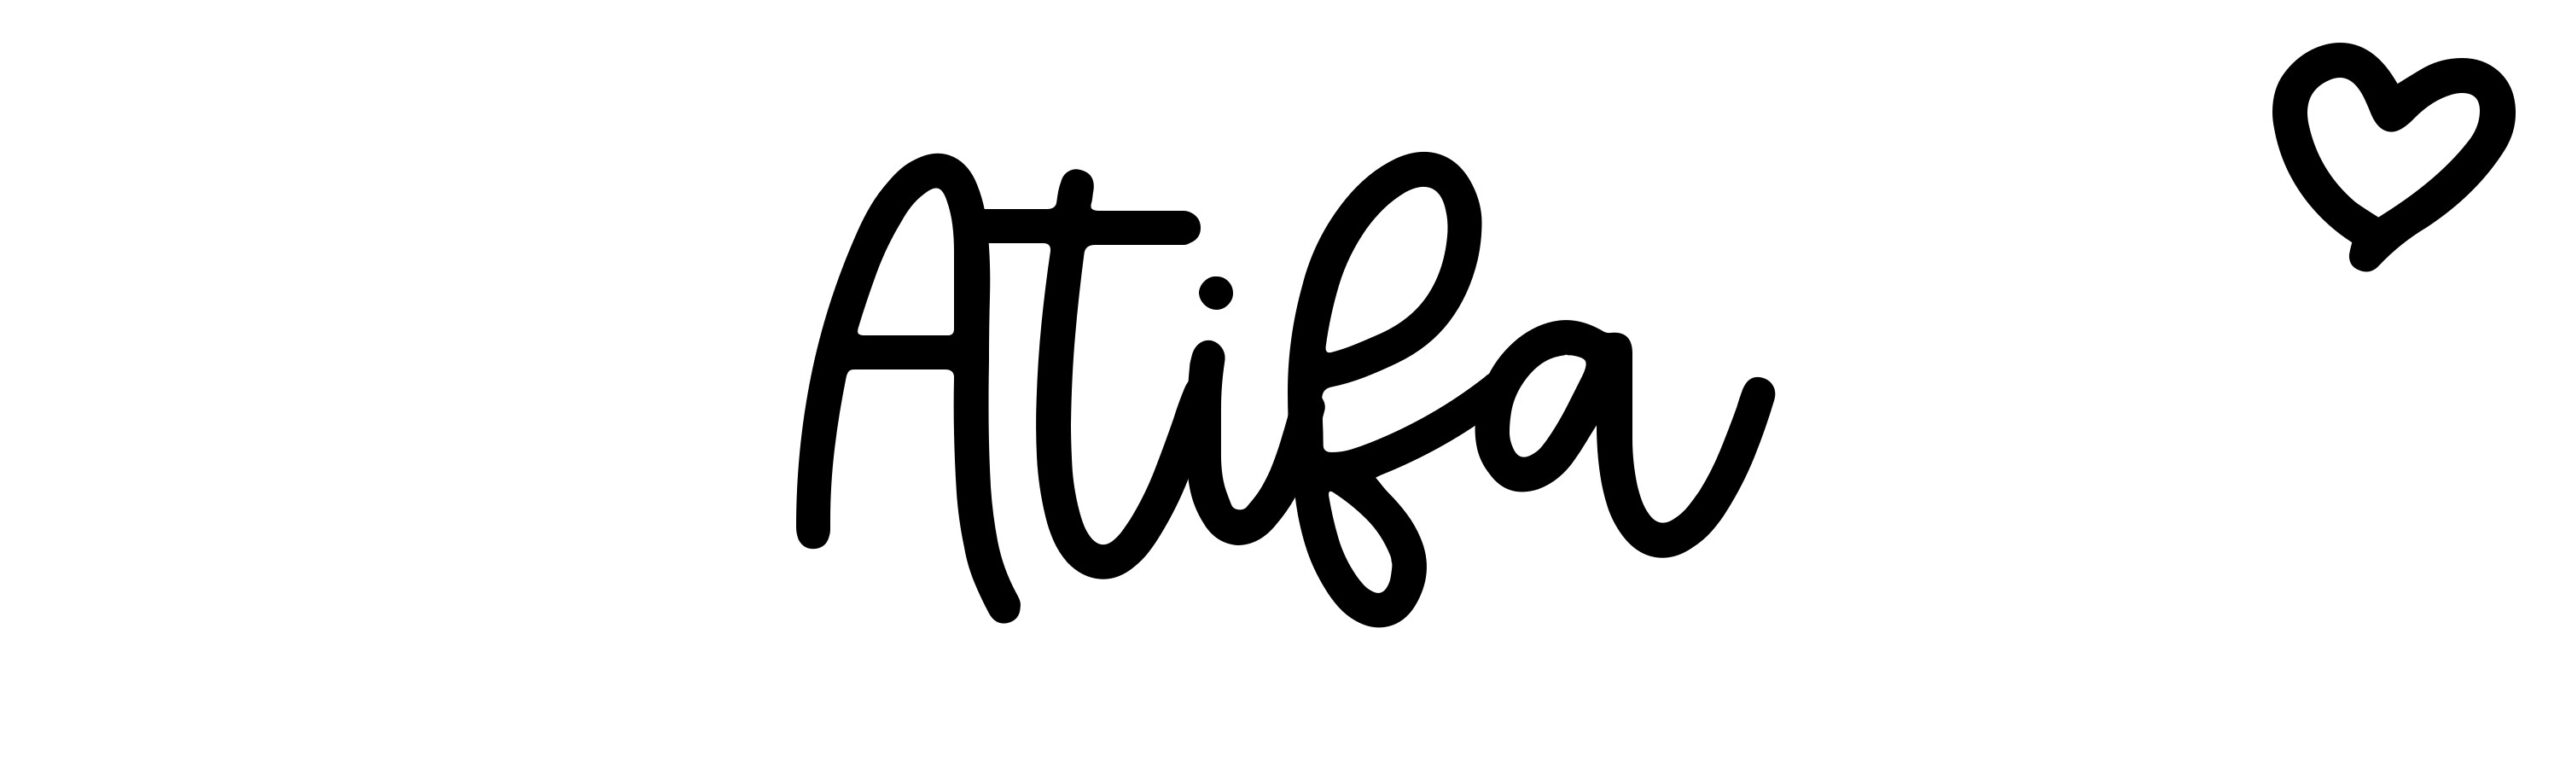 Atifa - Name meaning, origin, variations and more